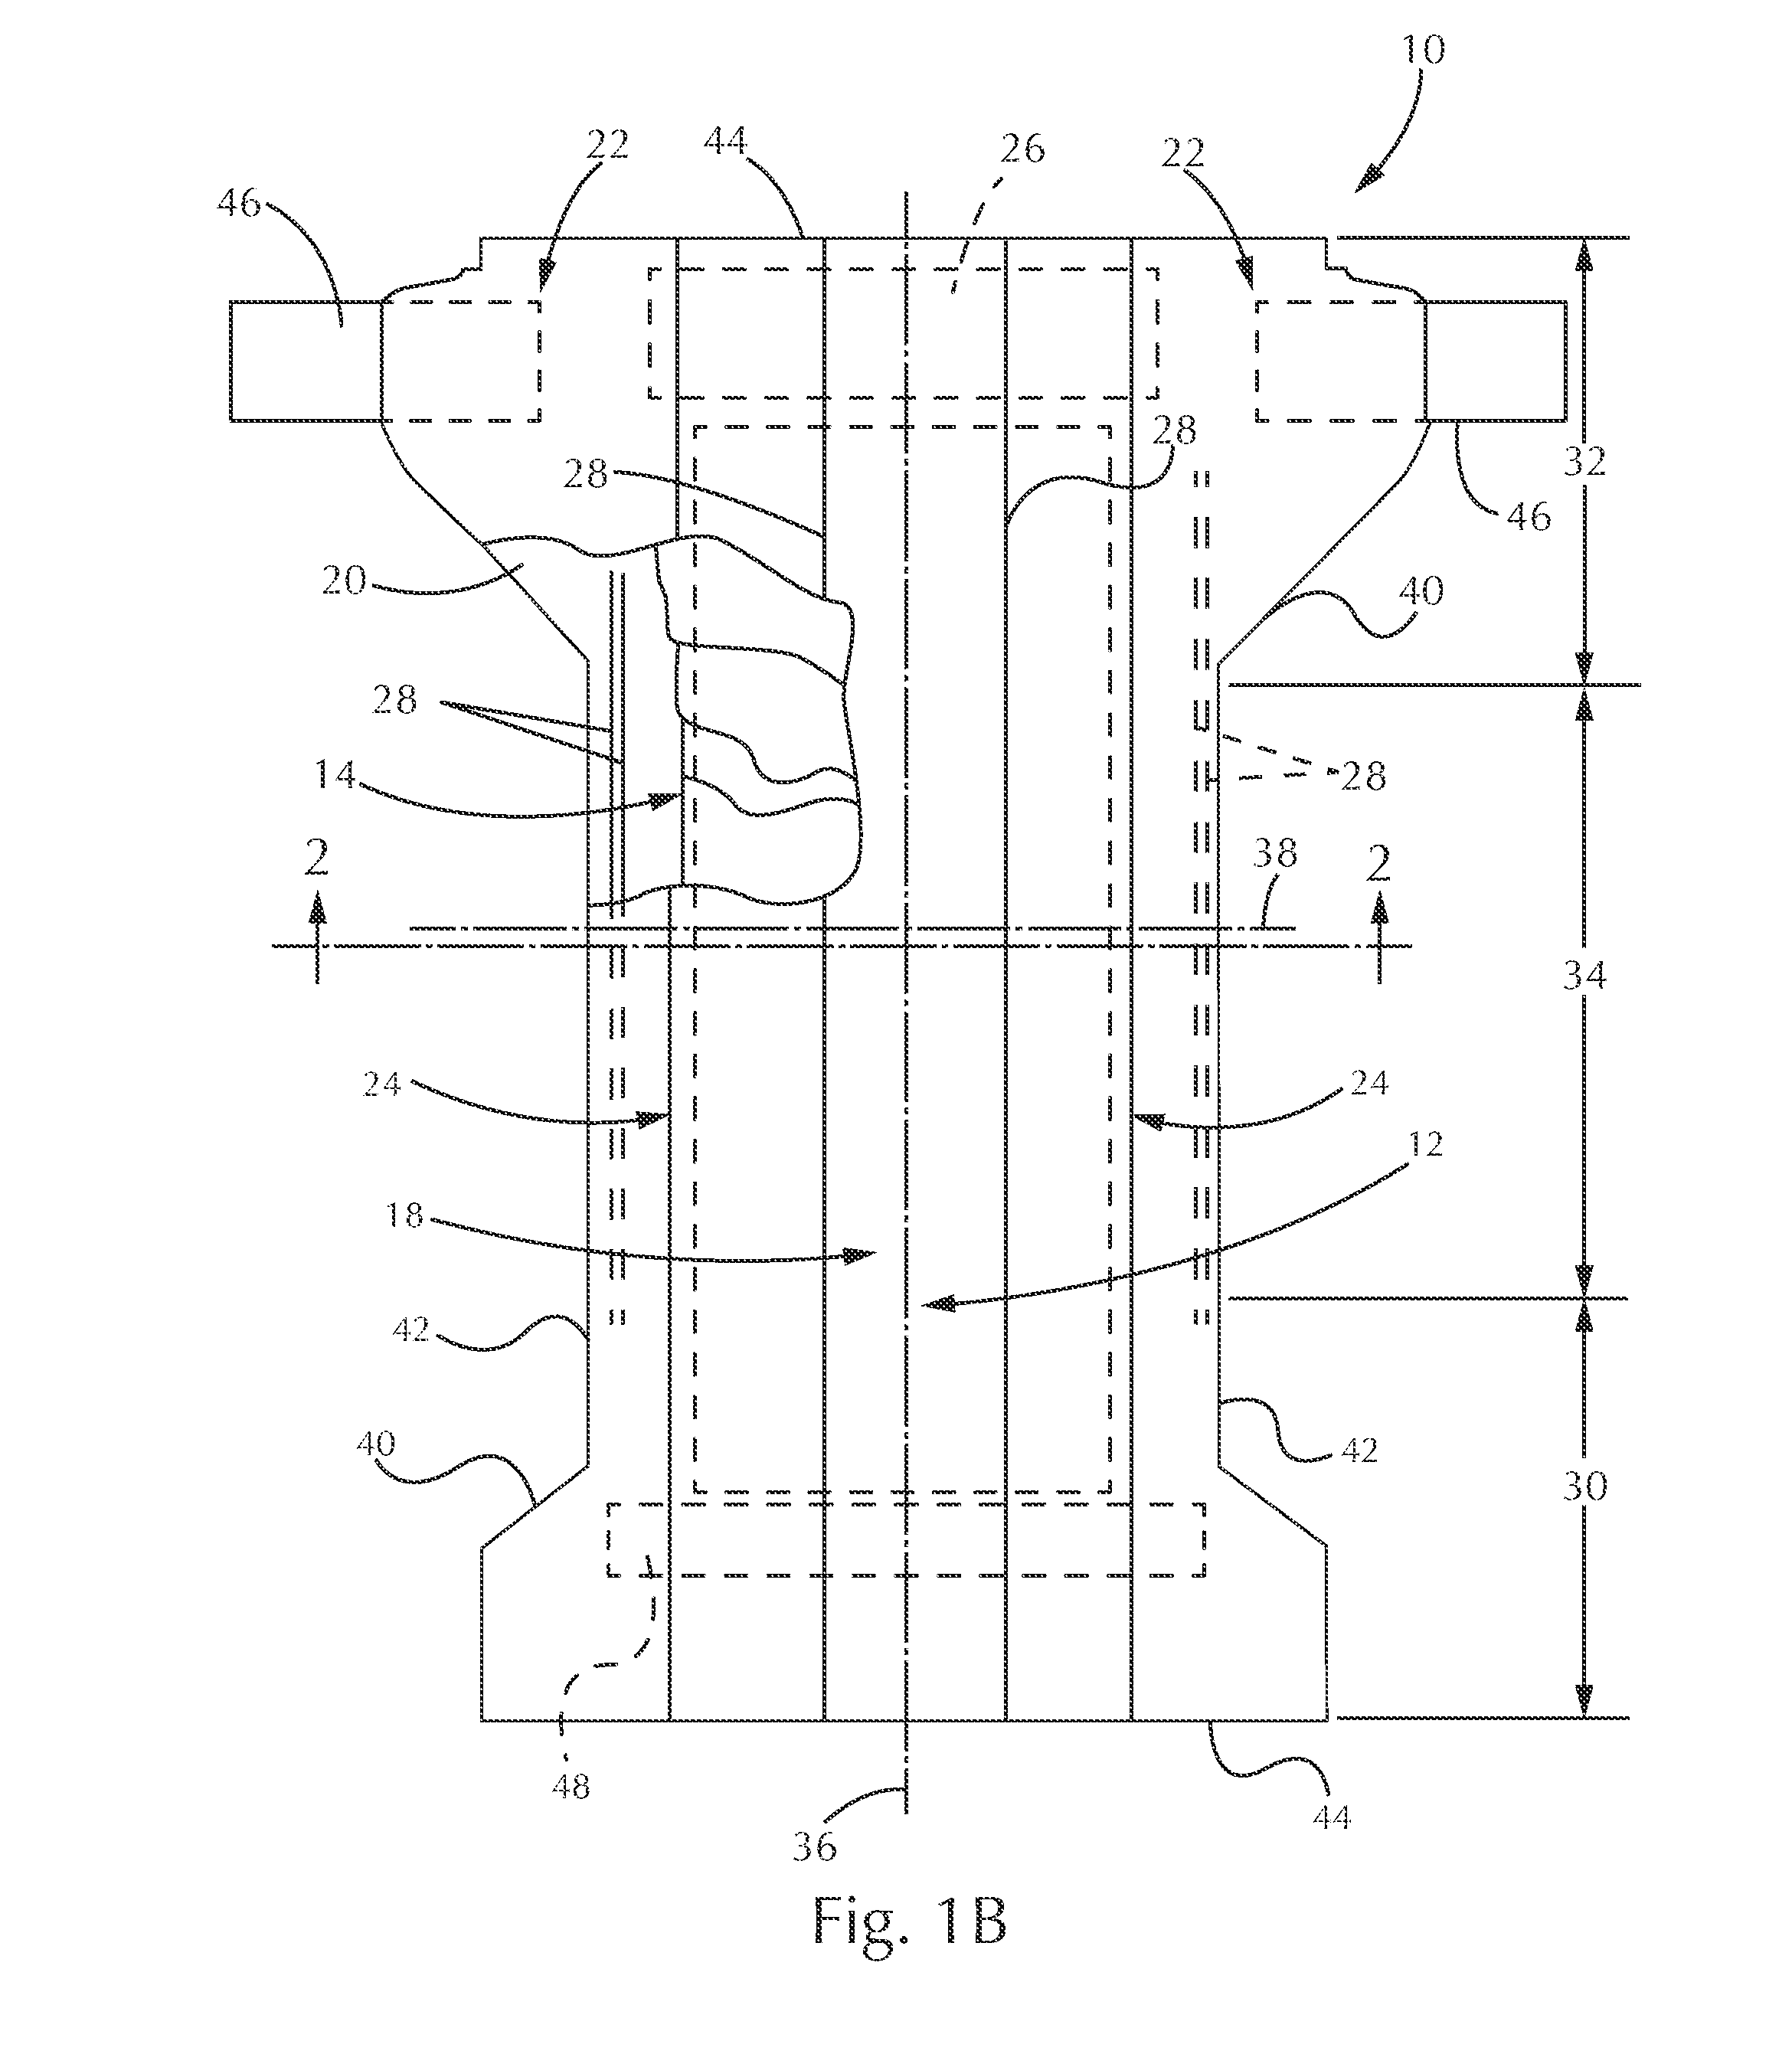 Diaper Structure With Enhanced Tactile Softness Attributes